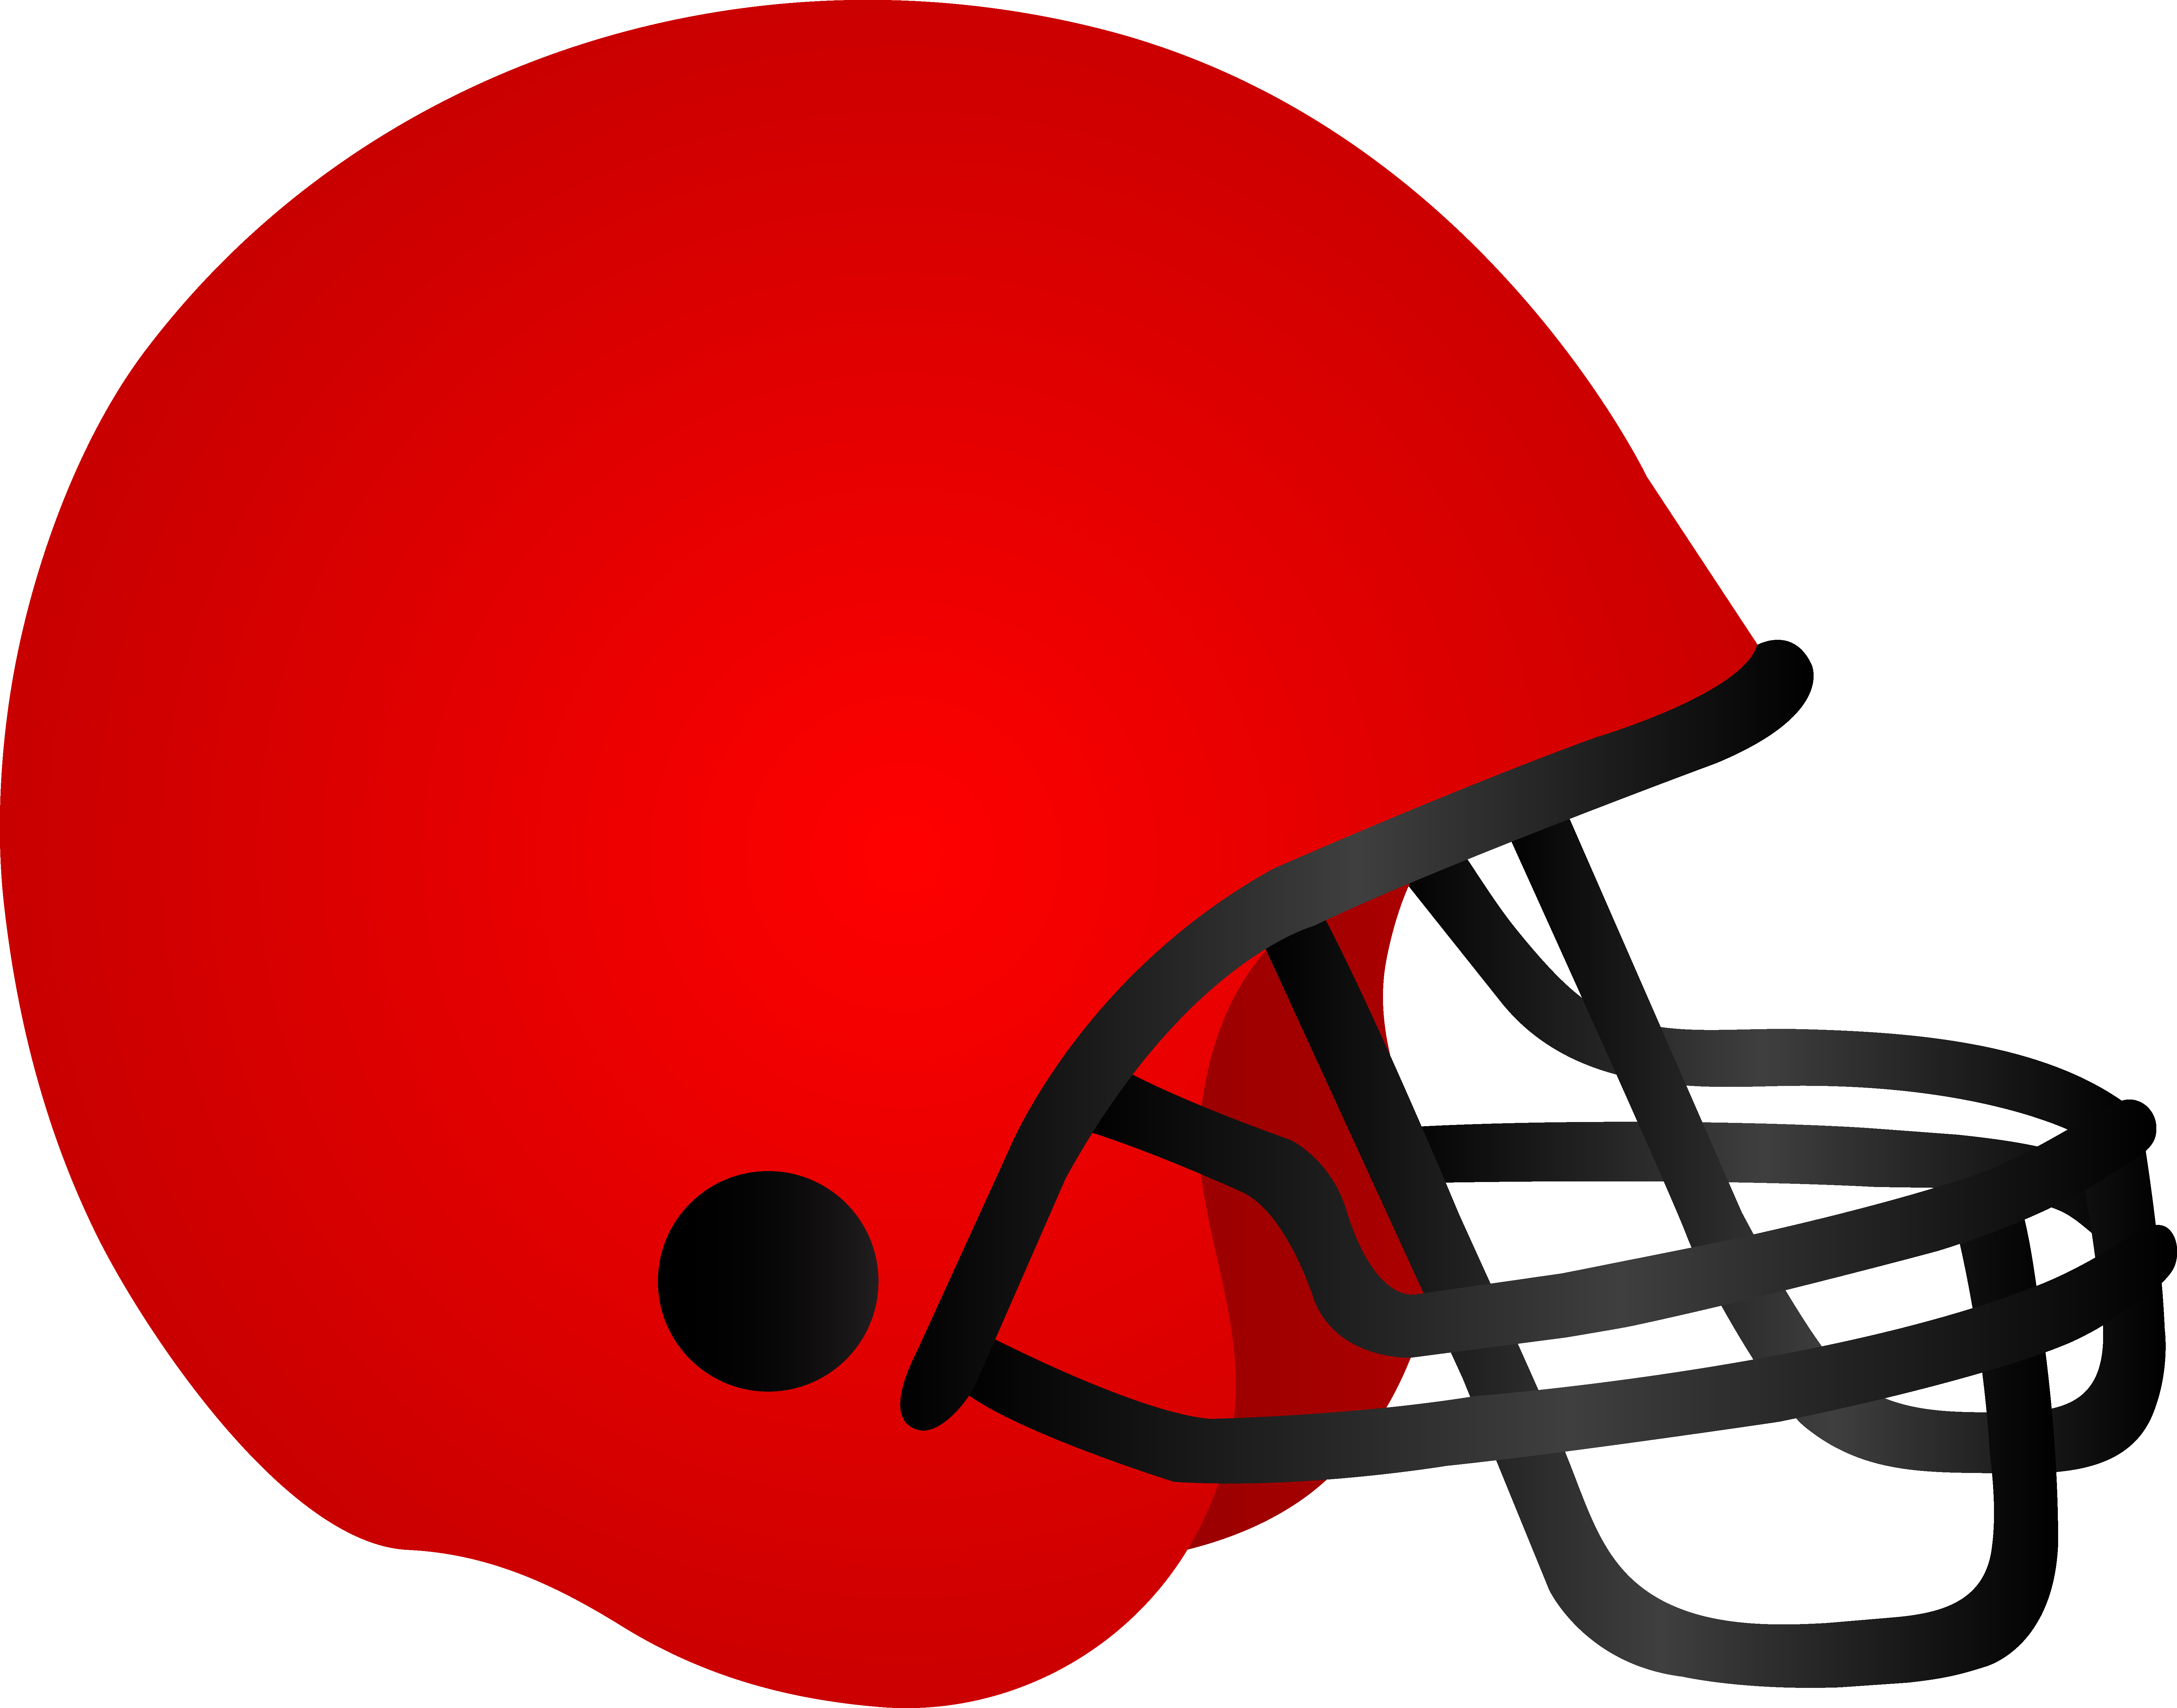 Image Of Football - ClipArt Best